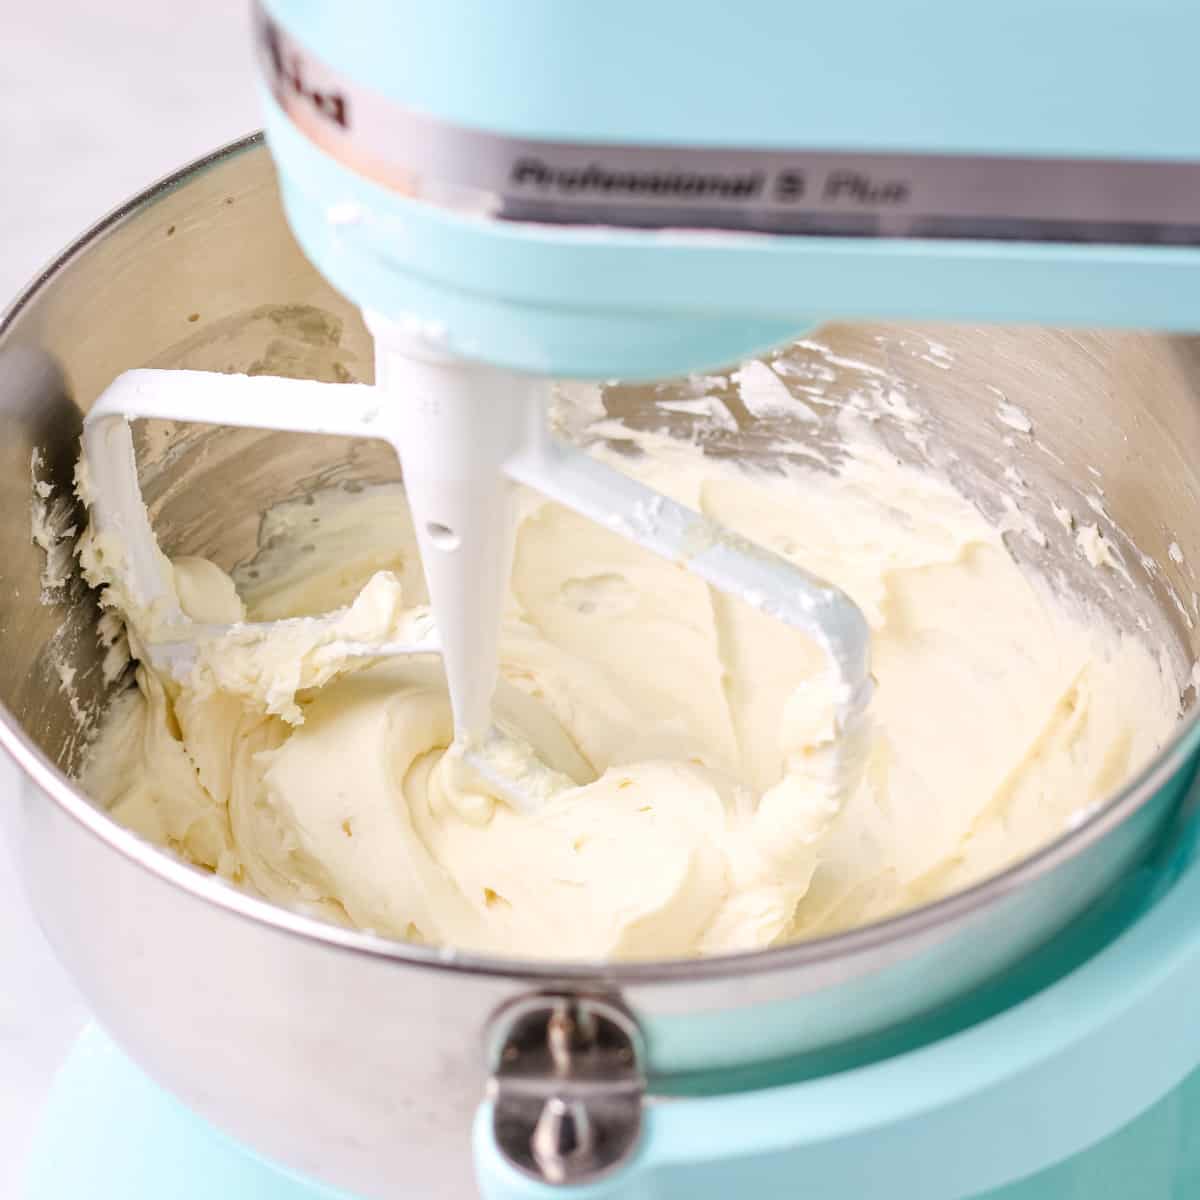 Mixing homemade buttercream frosting in a blue electric stand mixer.